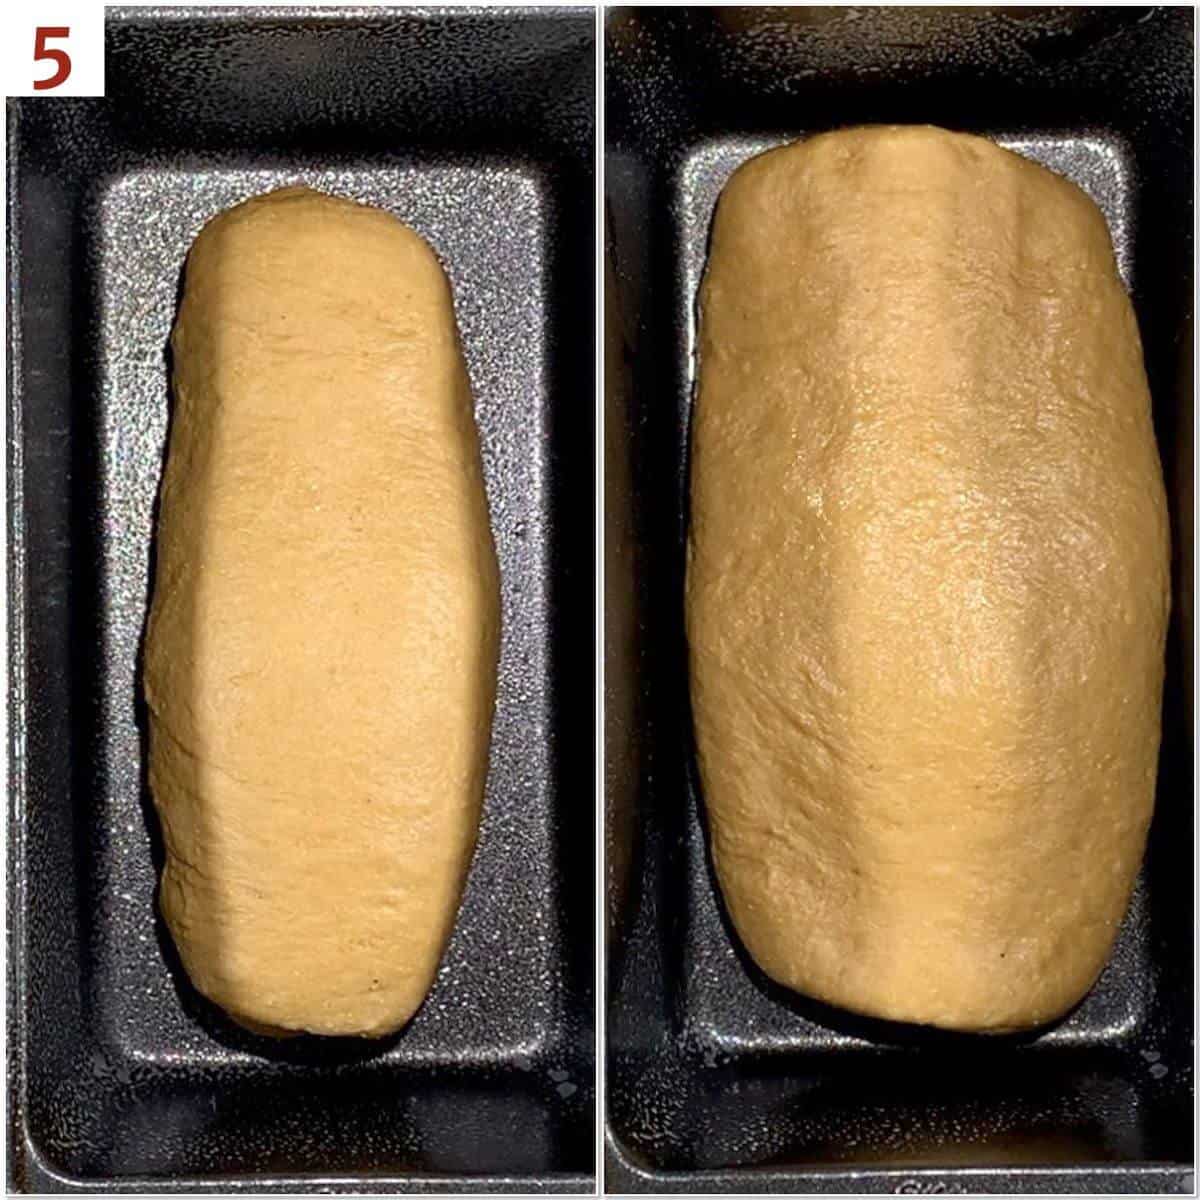 Colloage of shaped bread dough in loaf pan before & after rising.